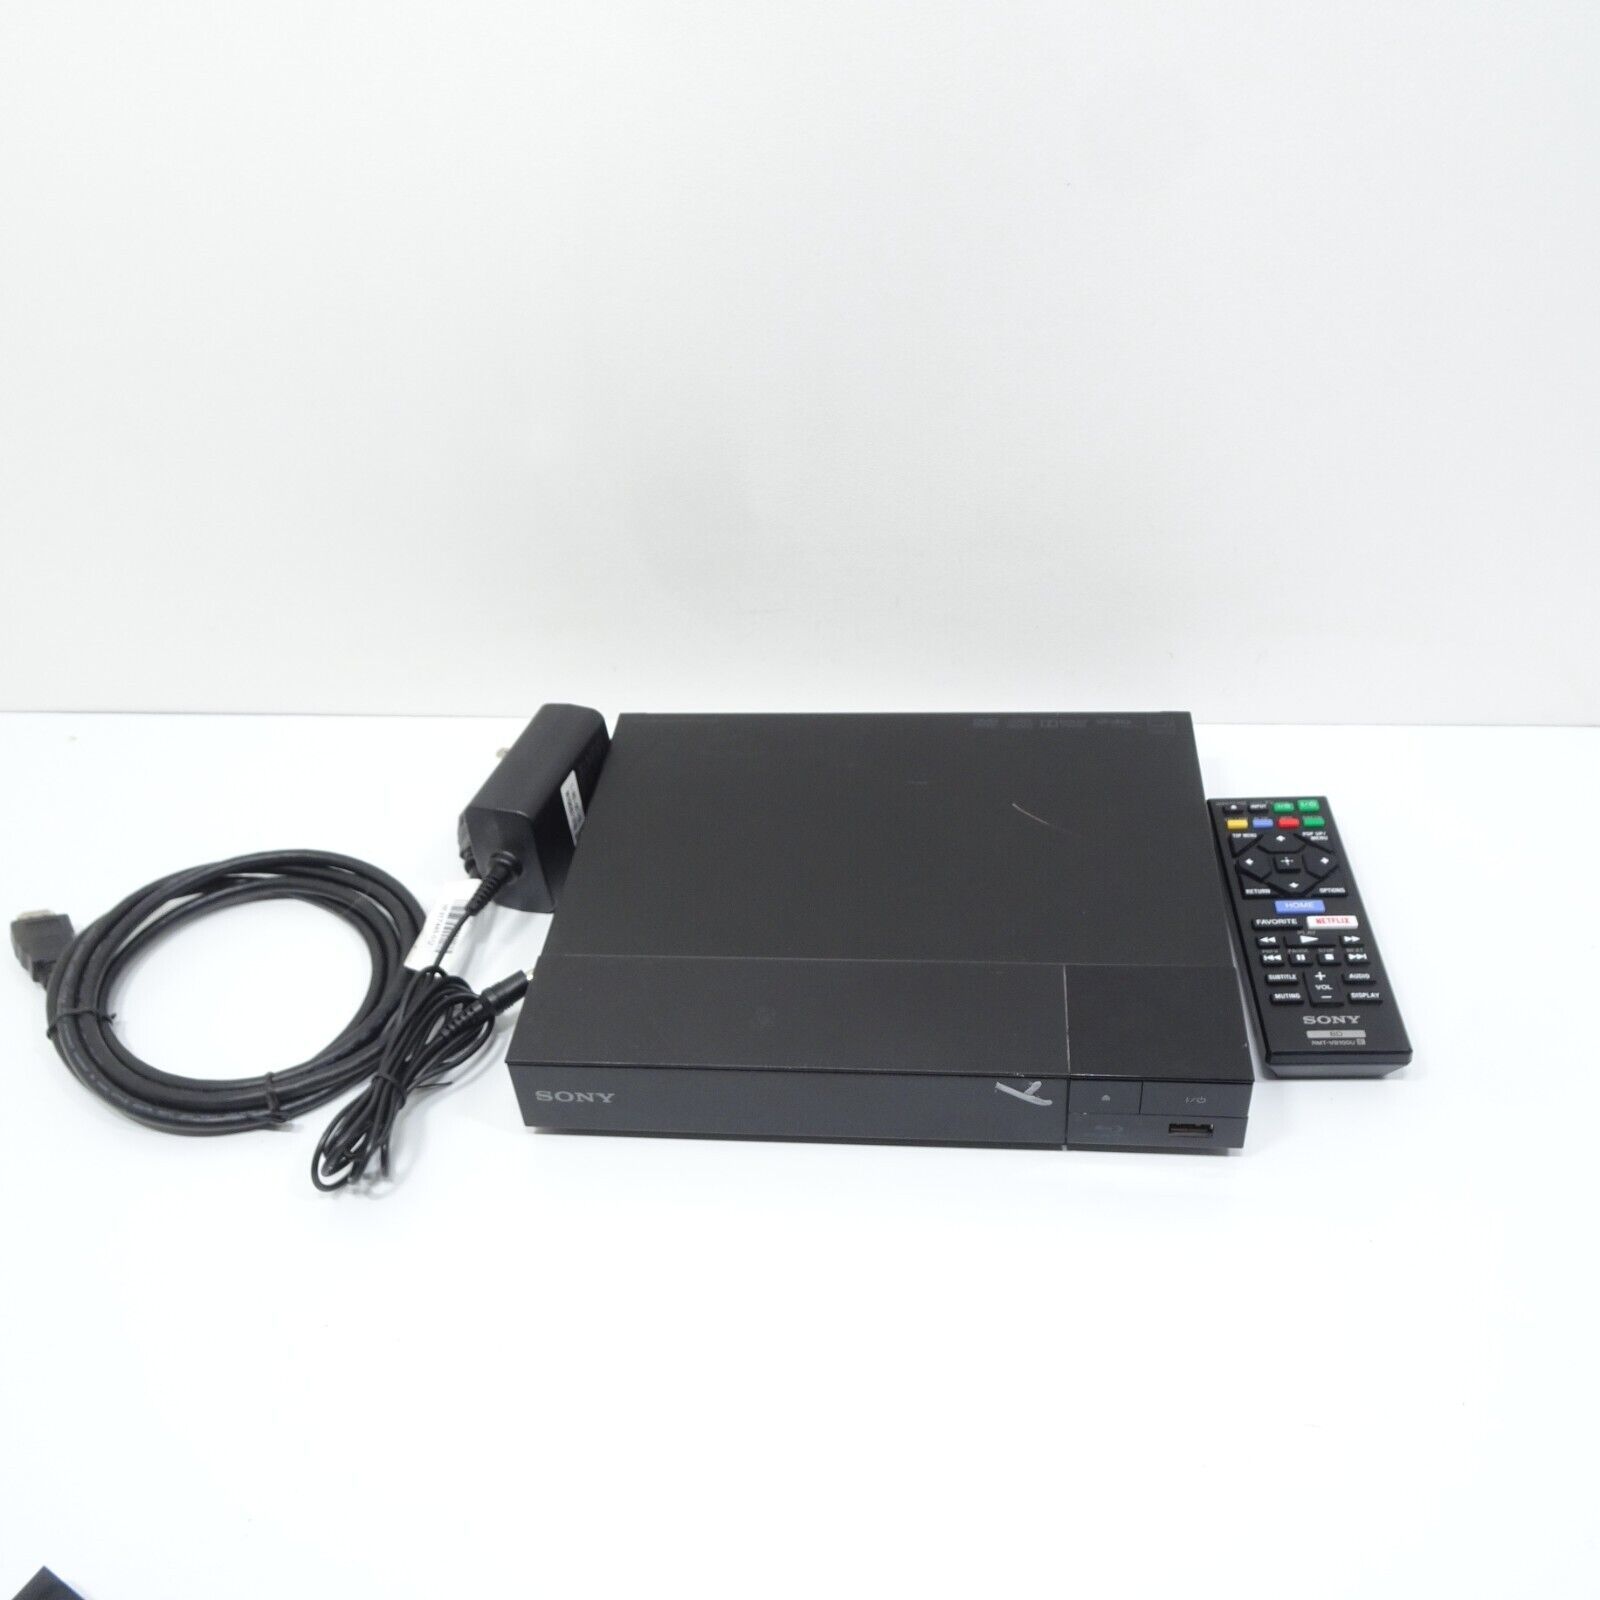 Primary image for Sony BDP-S1500 Blu-Ray/DVD Player with Remote and Power Cable